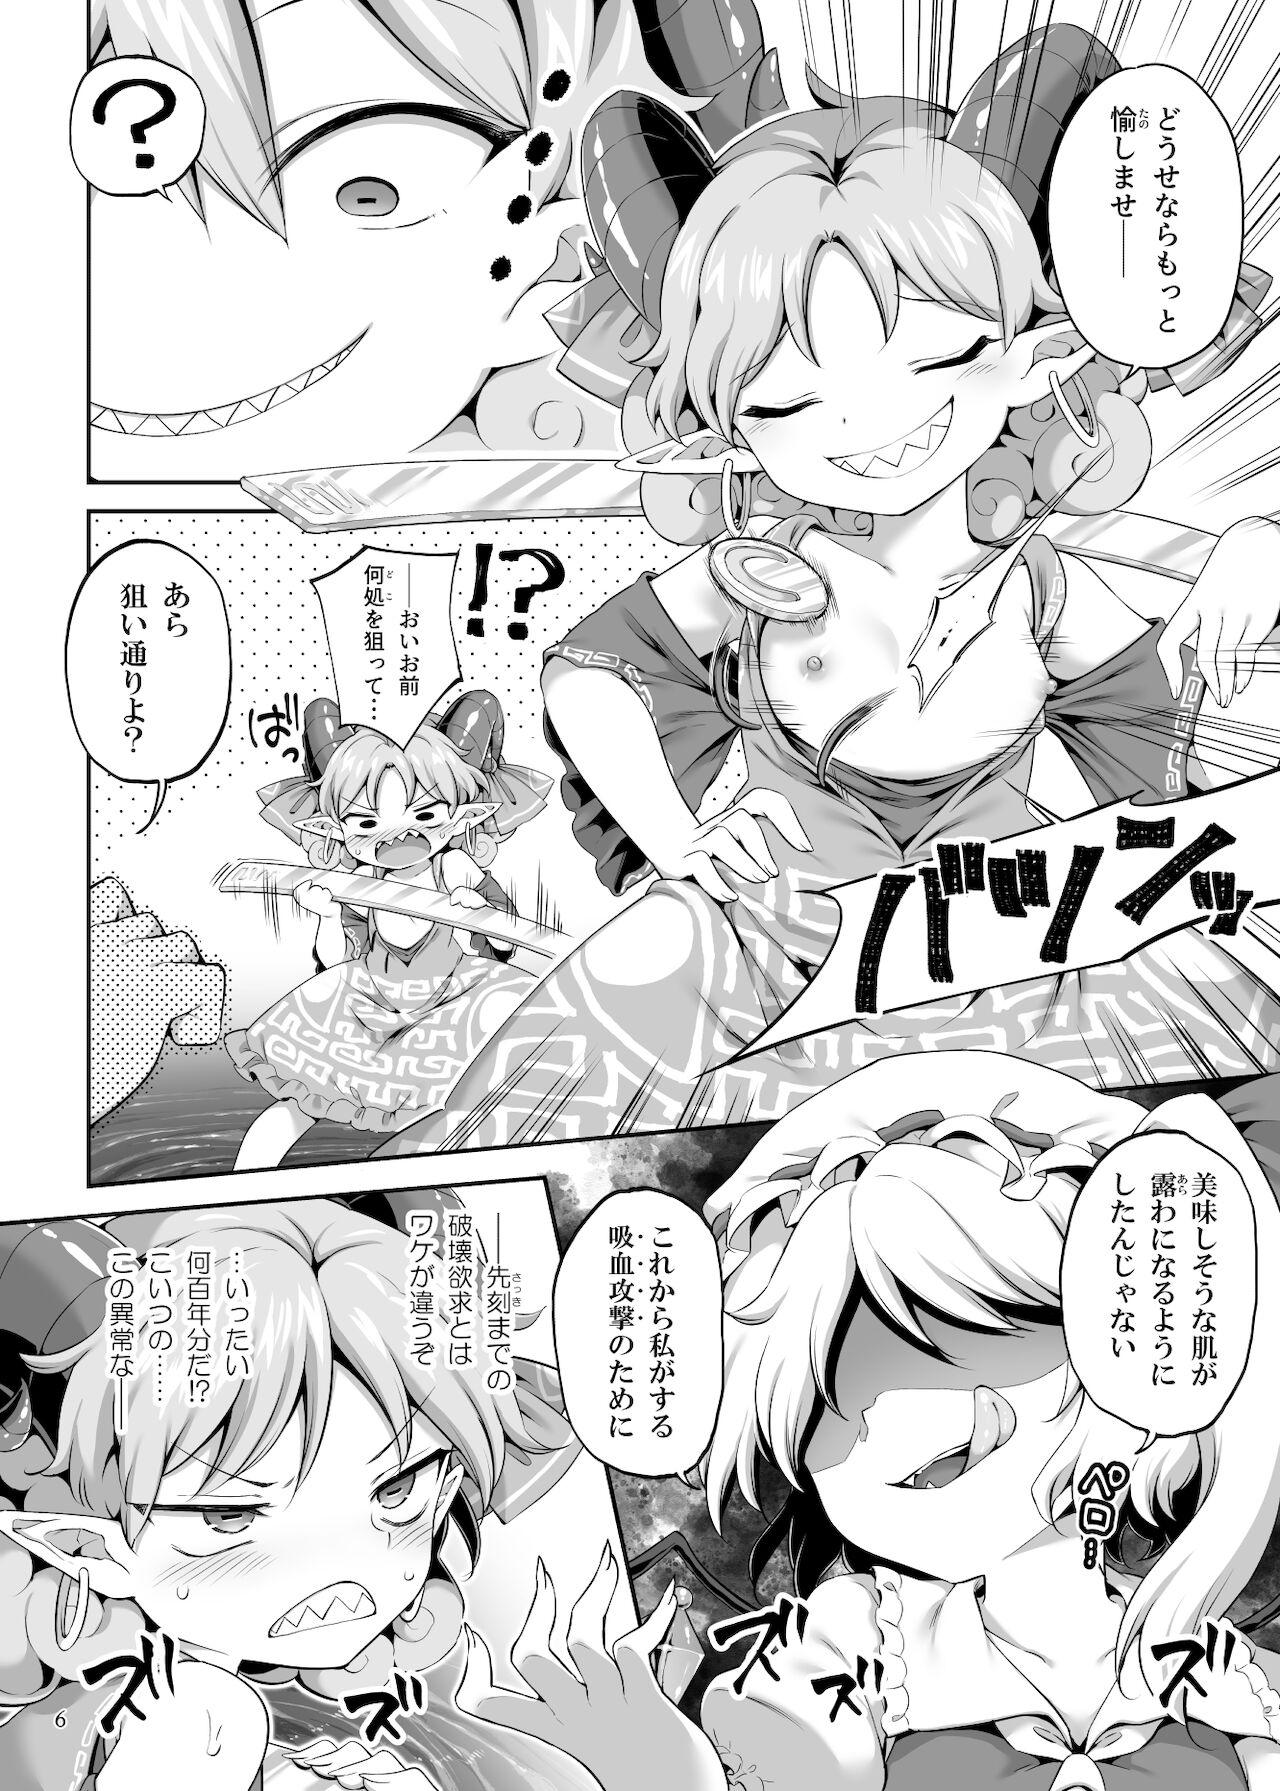 Naked 吸われて駄目なら吸ってみろ! - Touhou project Free Hardcore Porn - Page 6